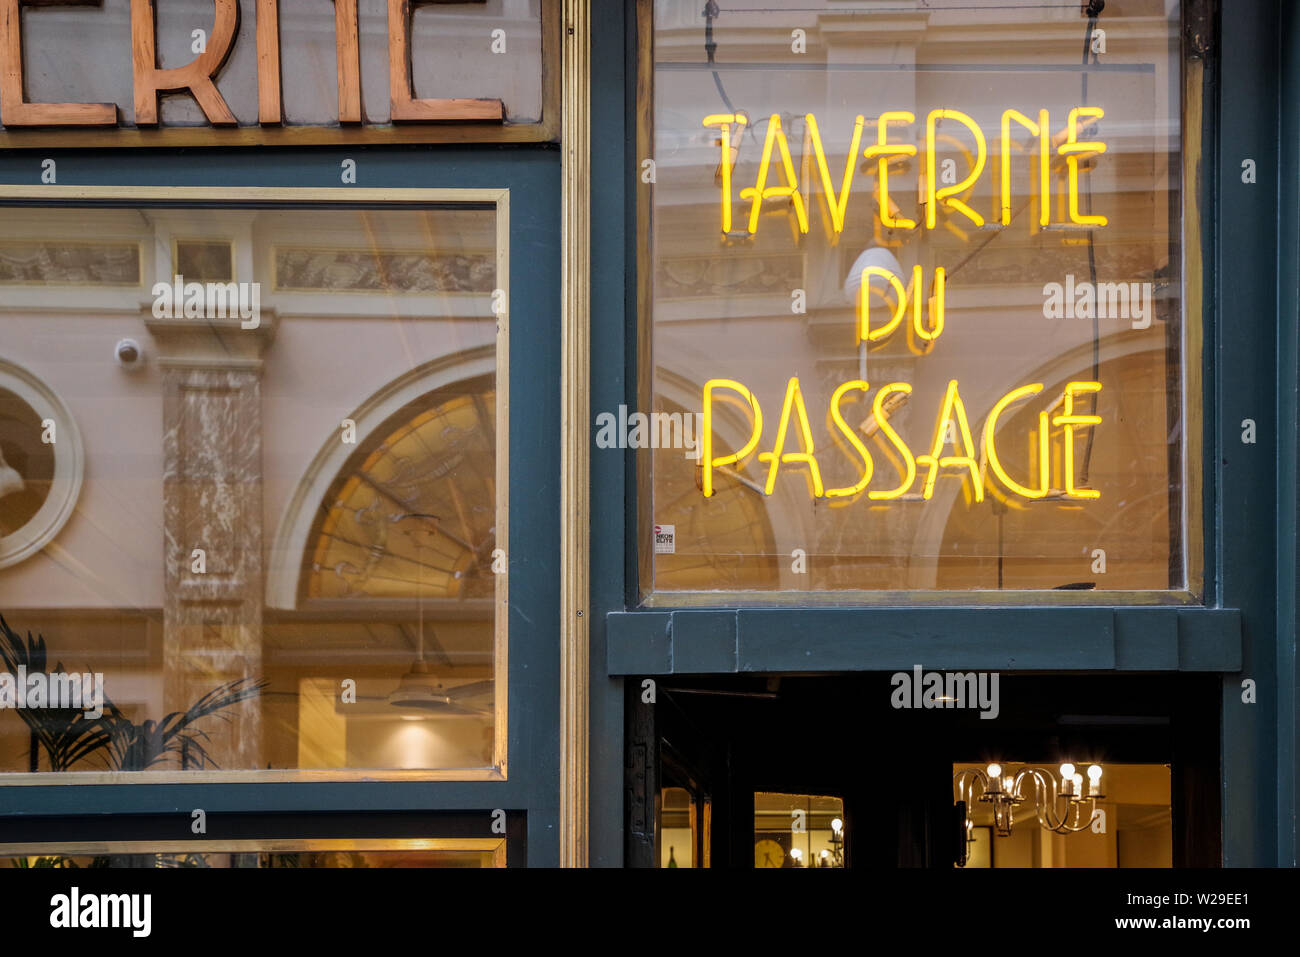 Taverne du Passage in Galeries Royales Saint-Hubert shopping arcade in central Brussels, Belgium Stock Photo